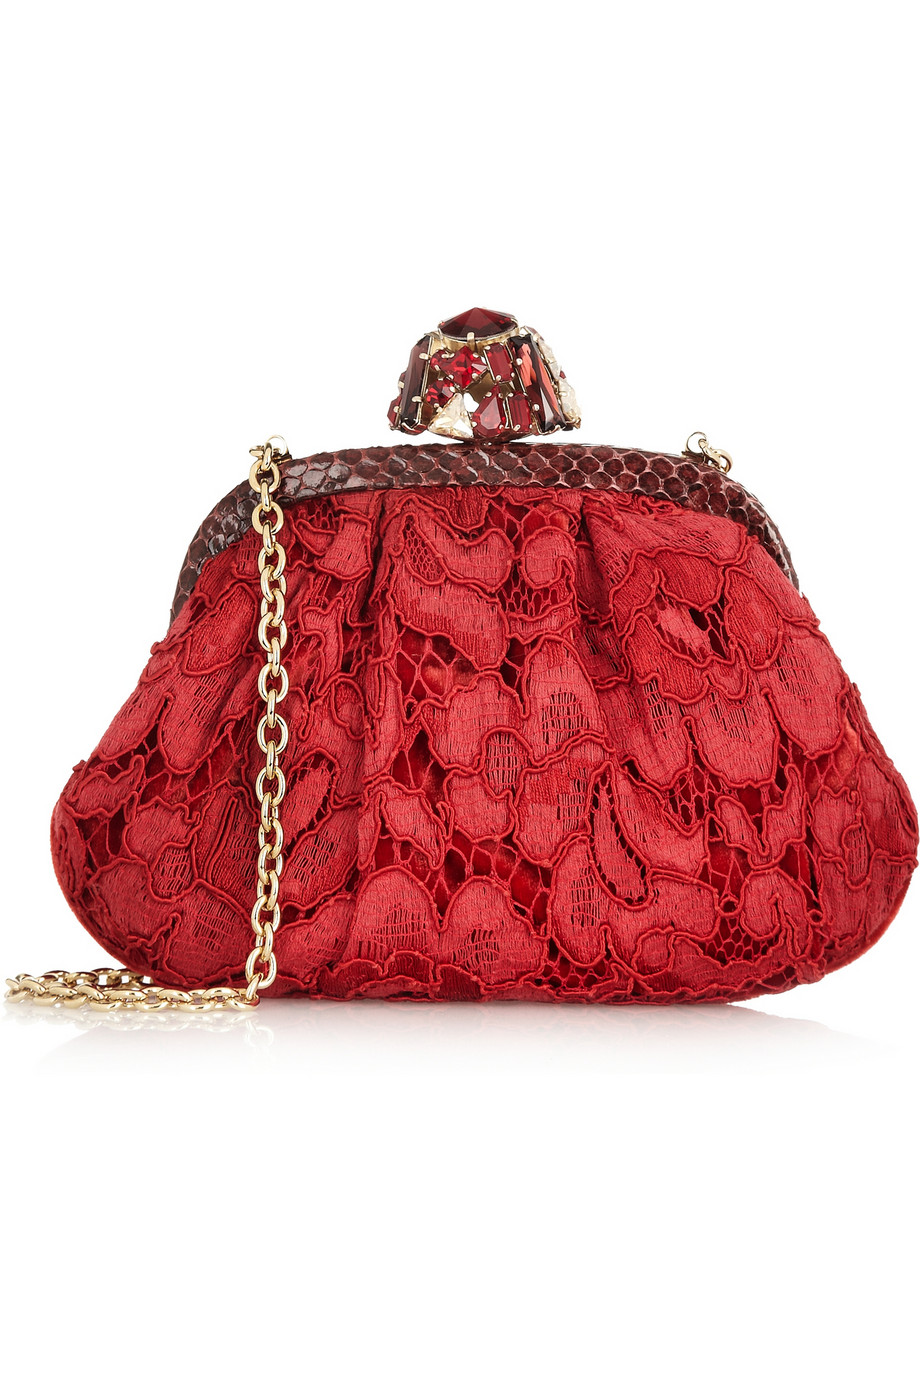 Lyst - Dolce & Gabbana Miss Dea Small Ayerstrimmed Lace and Velvet ...